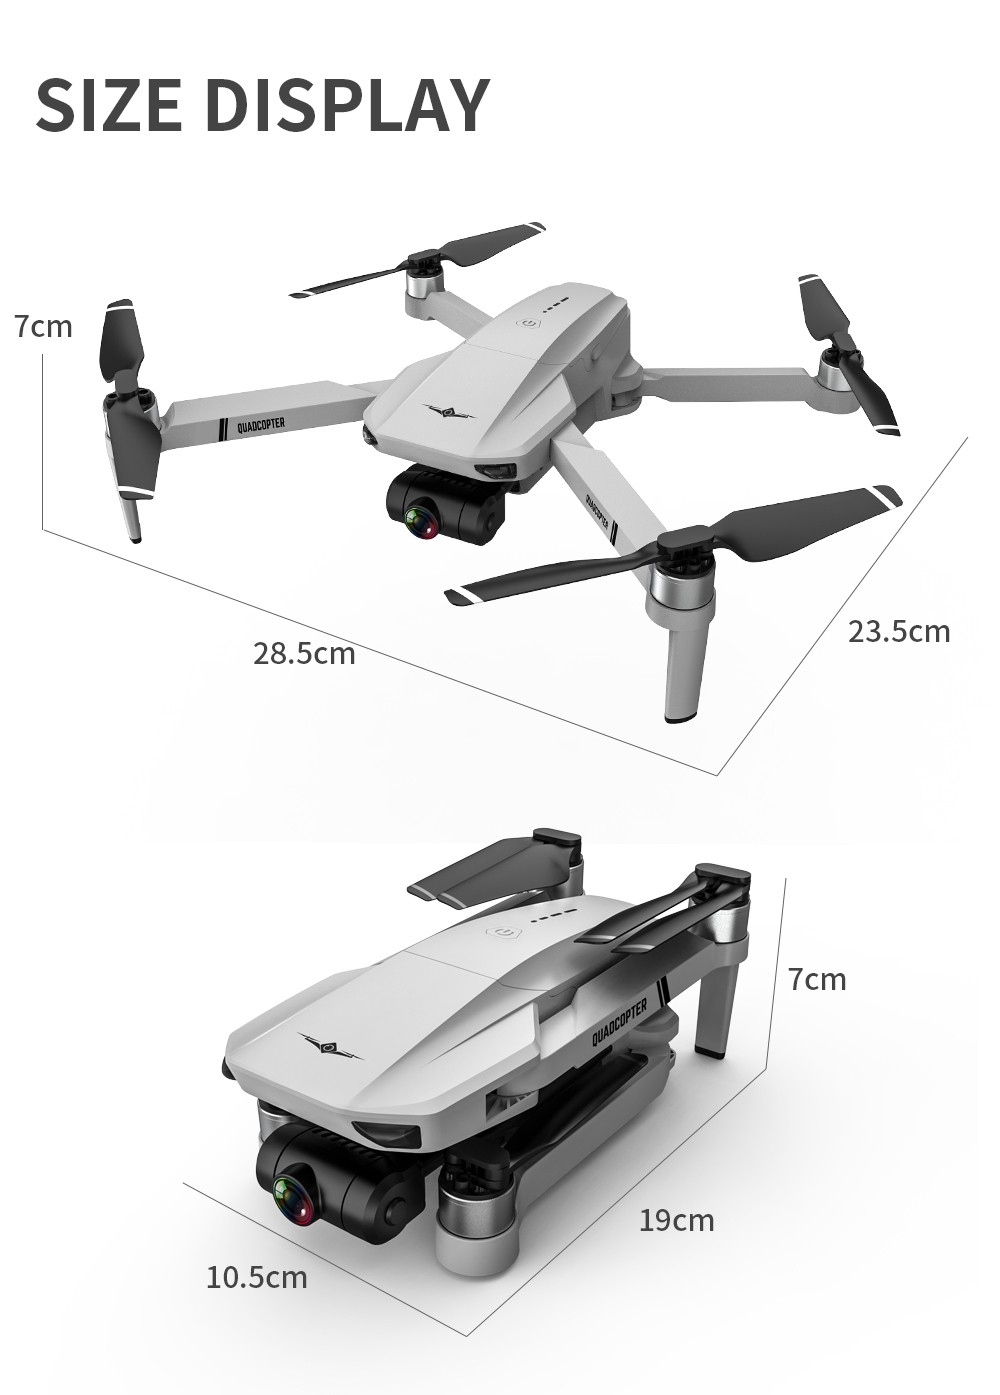 KF102 6K Camera GPS 5G WIFI FPV 2-Axis Self-stabilizing Mechanical Gimbal Brushless Foldable RC Drone - One Battery